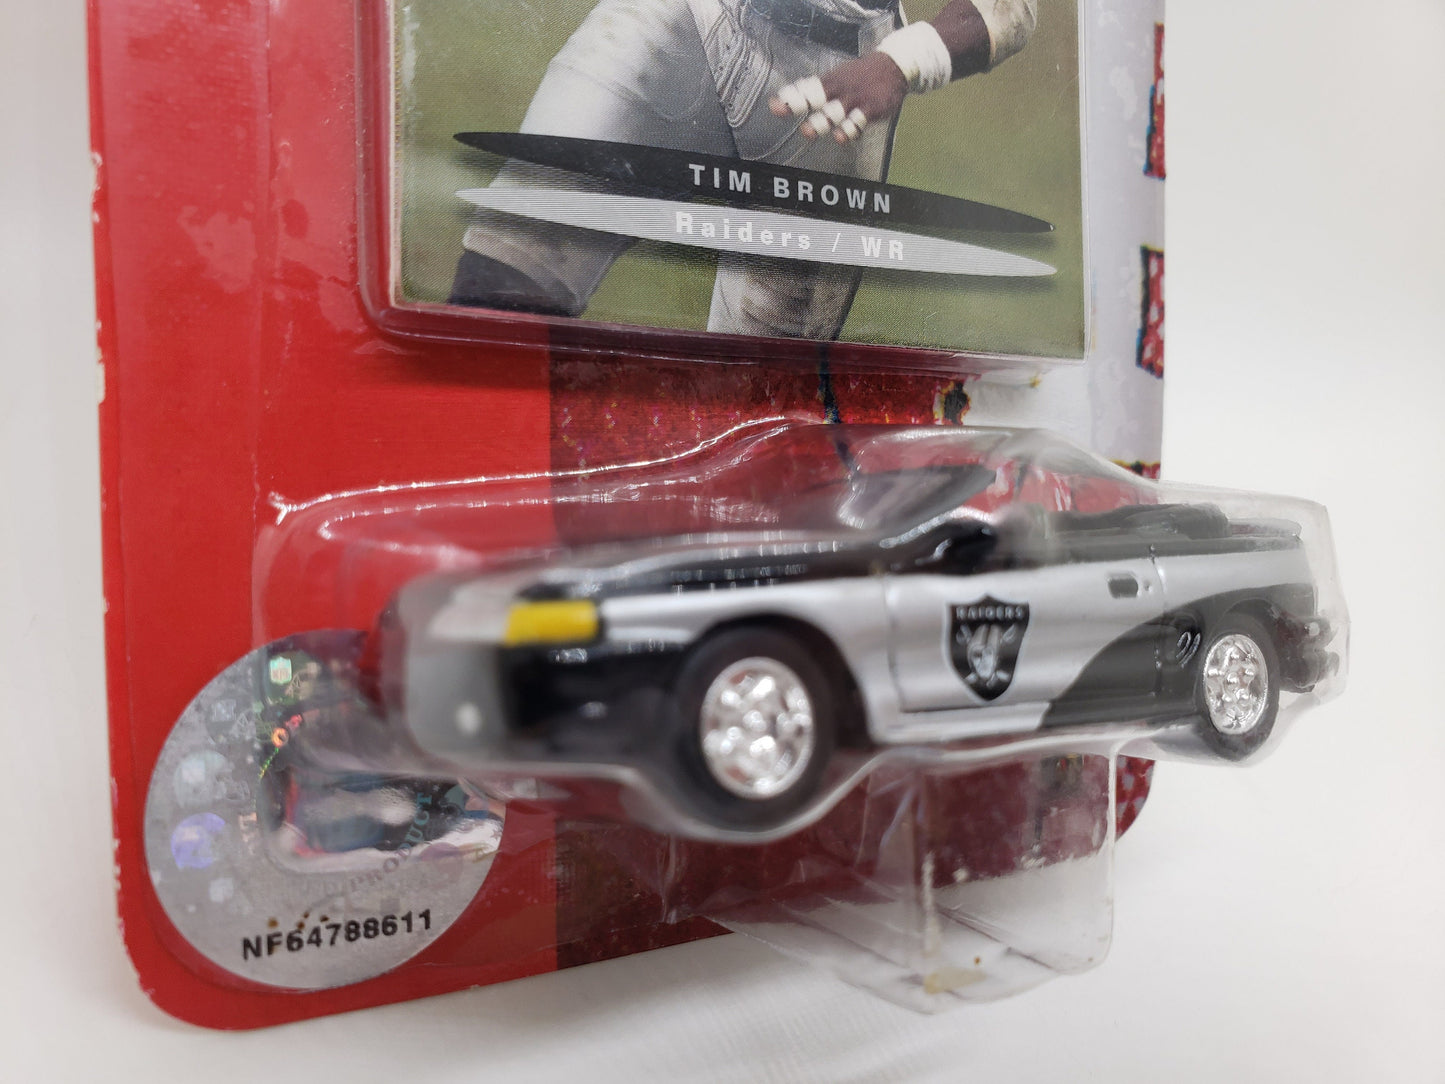 Fleer Collectibles Raiders Ford Mustang Silver Tim Brown Card NFL Team Collectible Miniature Scale Model Toy Car Perfect Birthday Gift